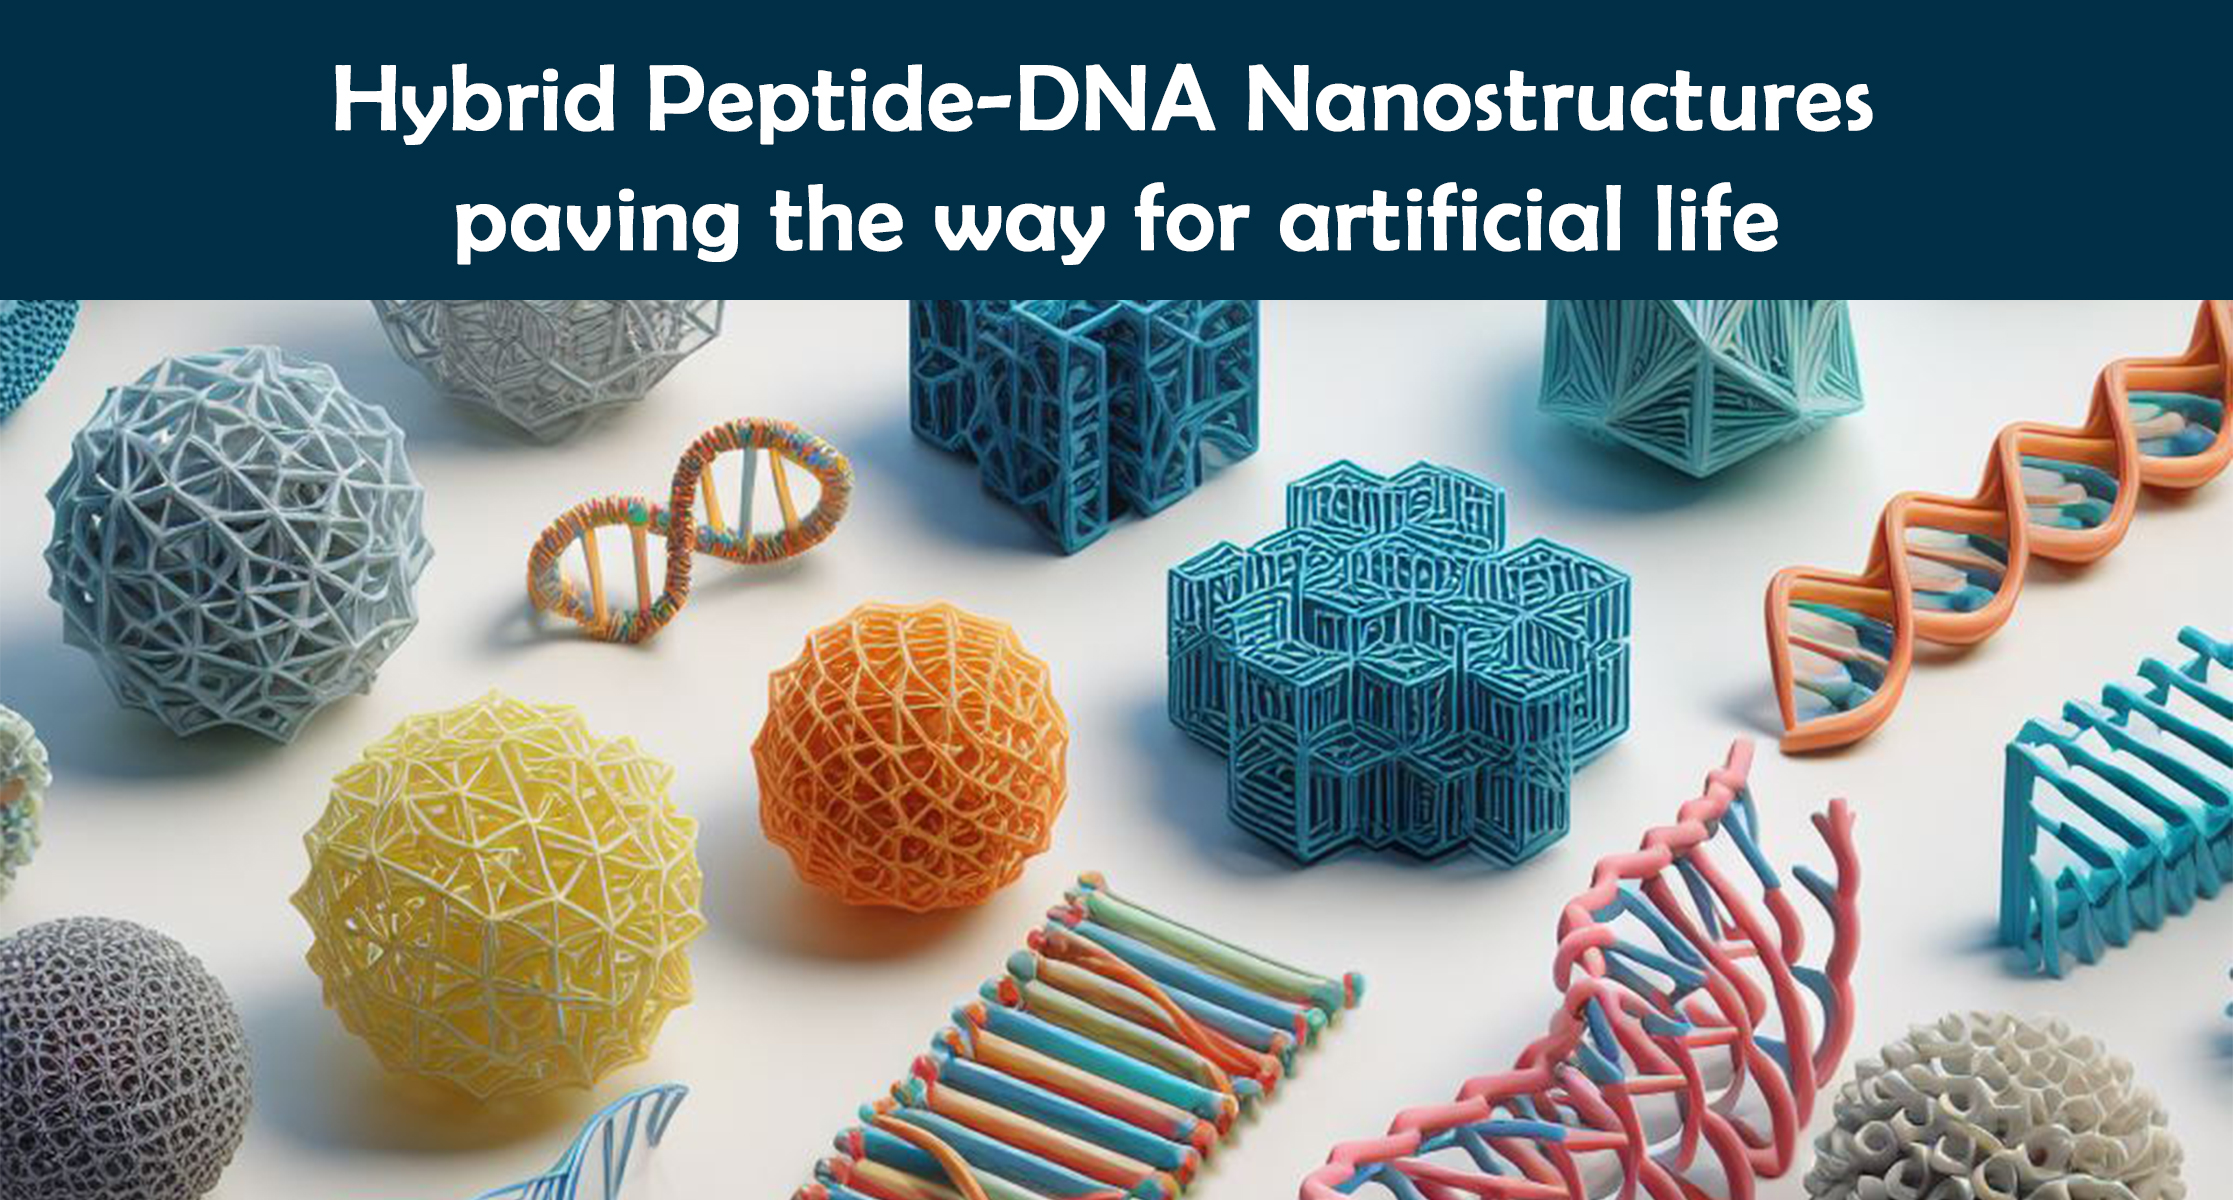 Hybrid Peptide-DNA Nanostructures paving the way for artificial life